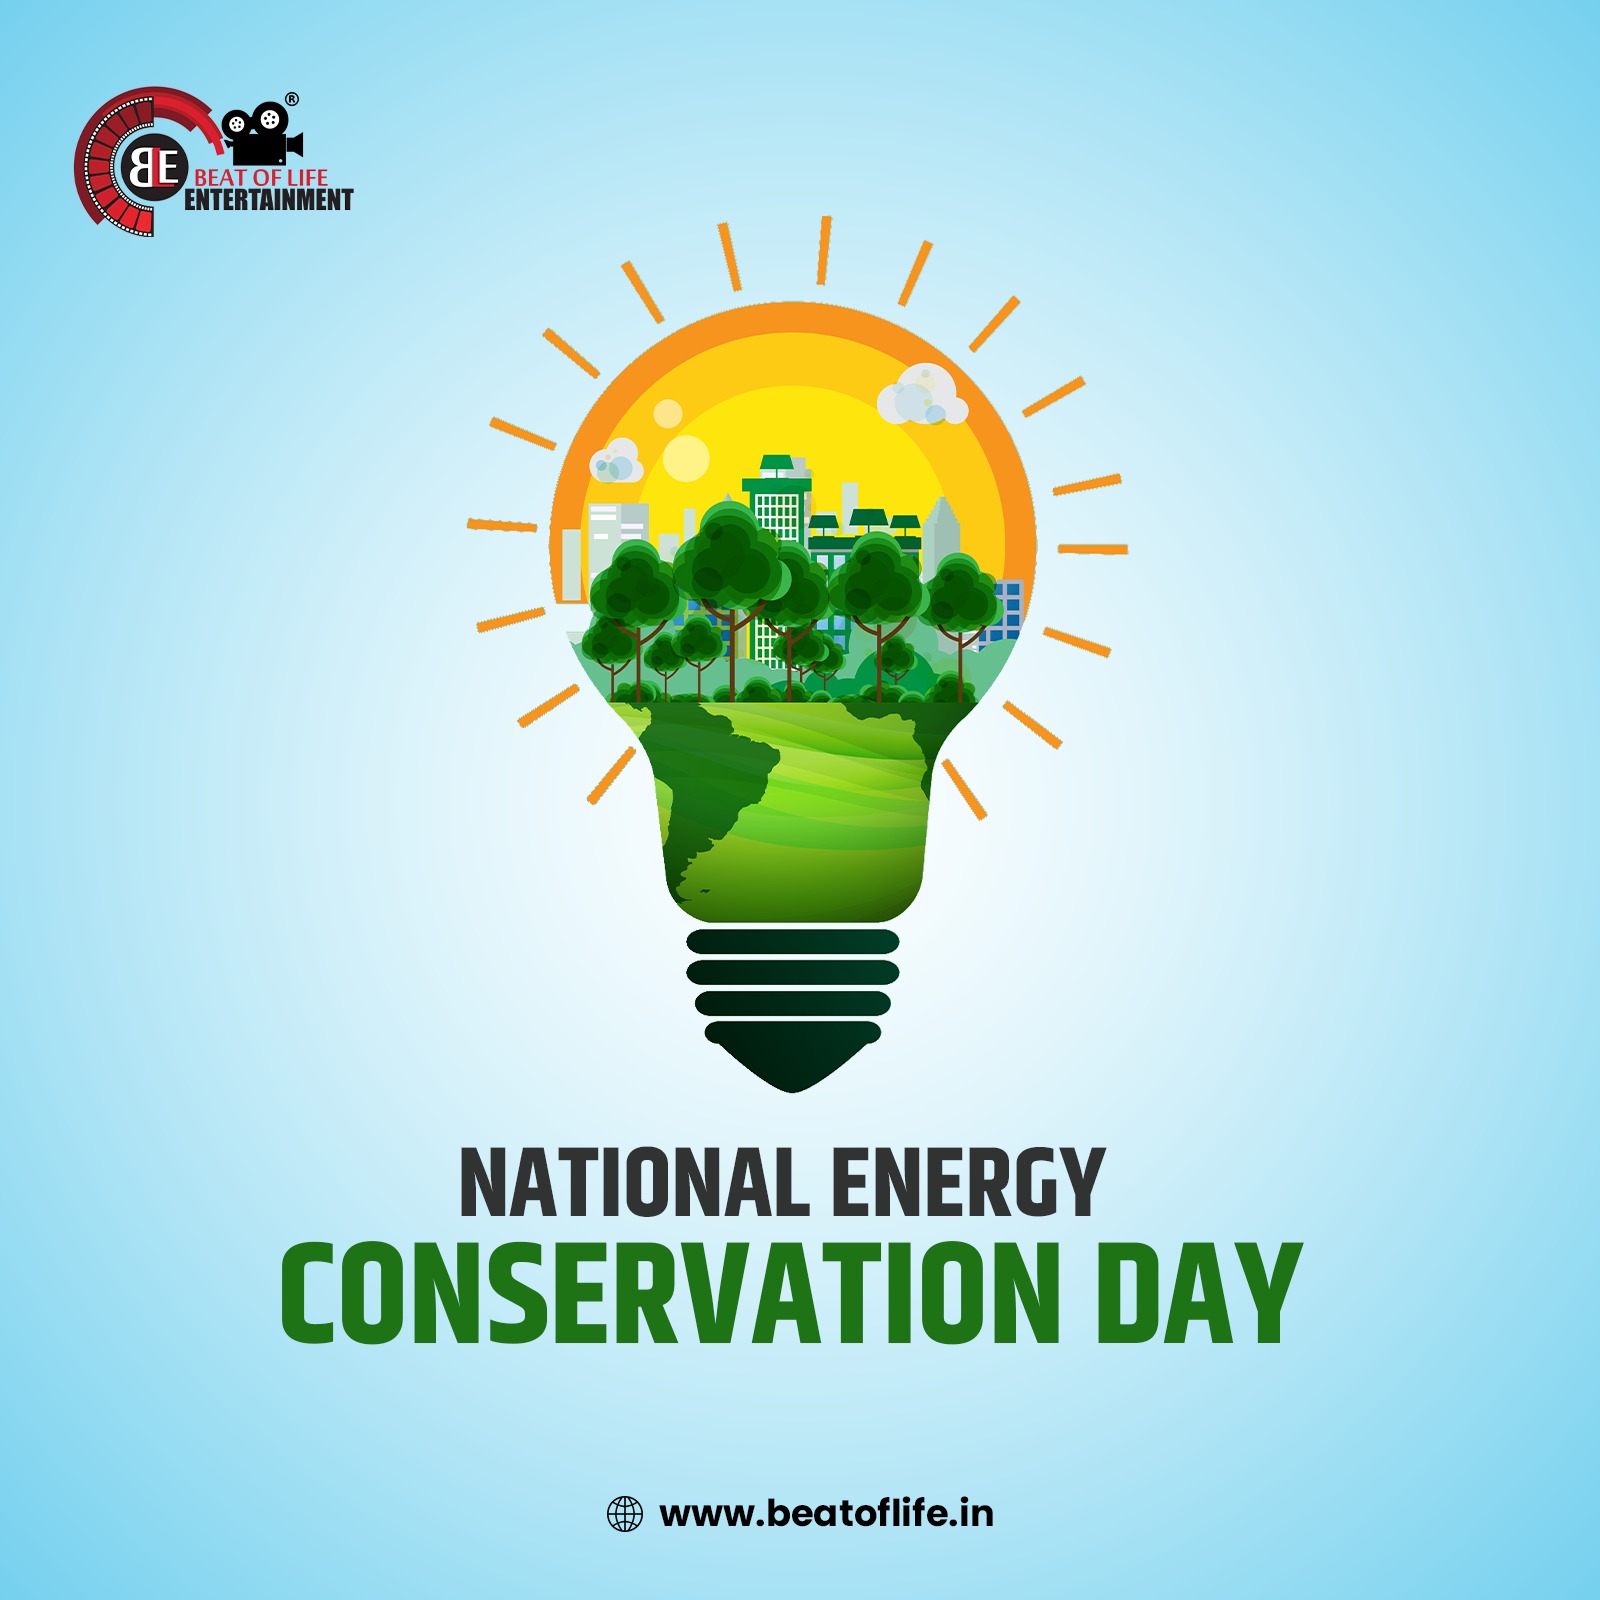 NATIONAL ENERGY CONSERVATION DAY